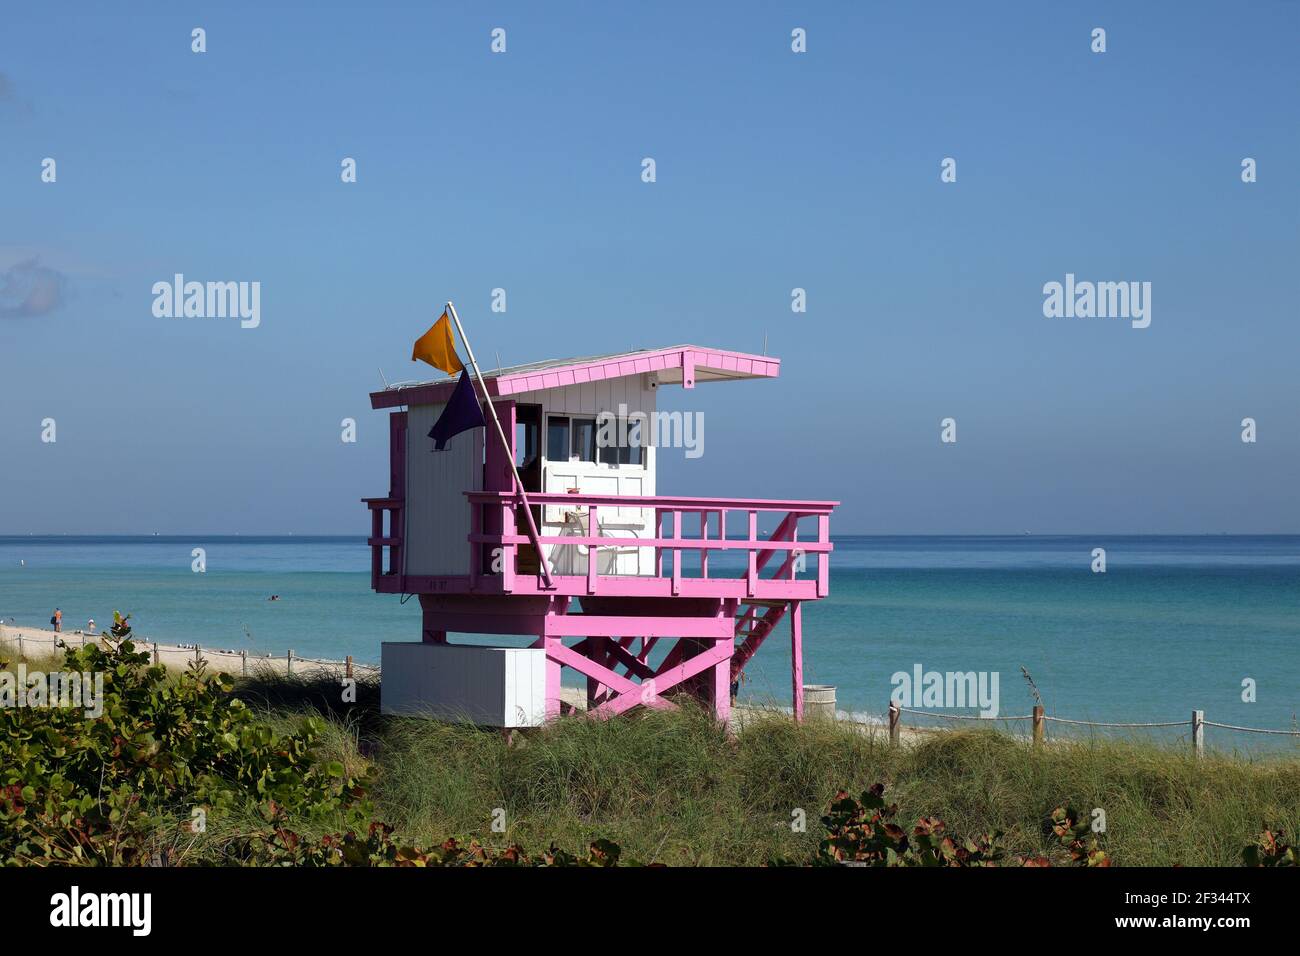 Géographie / Voyage, Etats-Unis, Floride, Miami Beach, Baywatch station (Life Guard petite maison), Additional-Rights-Clearance-Info-not-available Banque D'Images